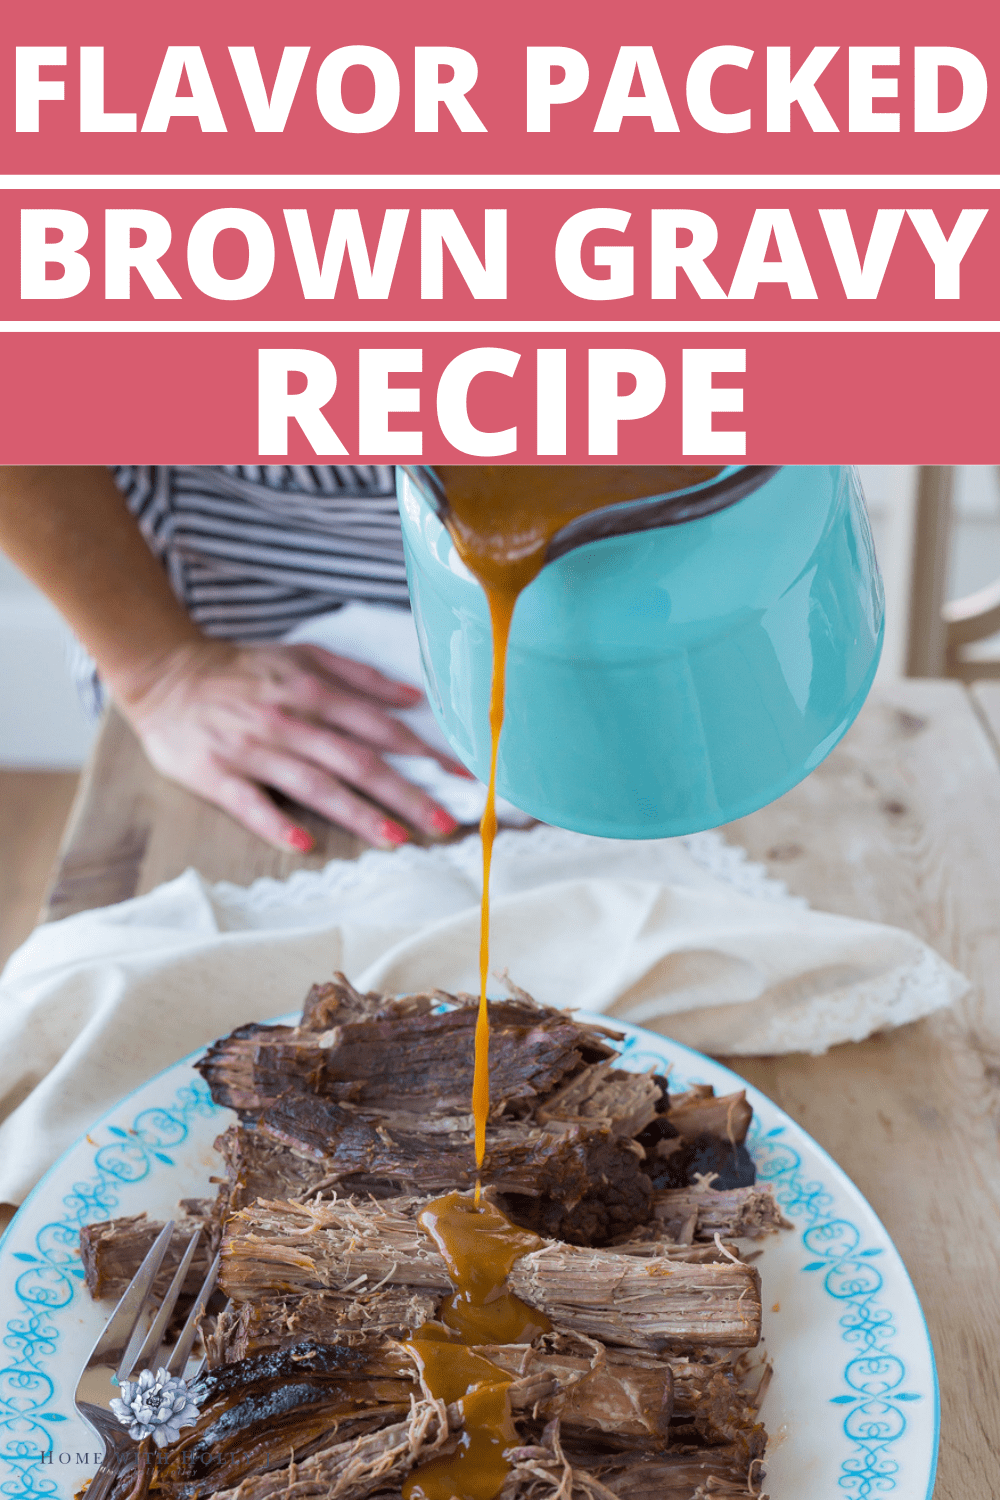 Looking for an easy homemade brown gravy recipe that's packed with flavor? Look no further! Follow these step-by-step instructions.